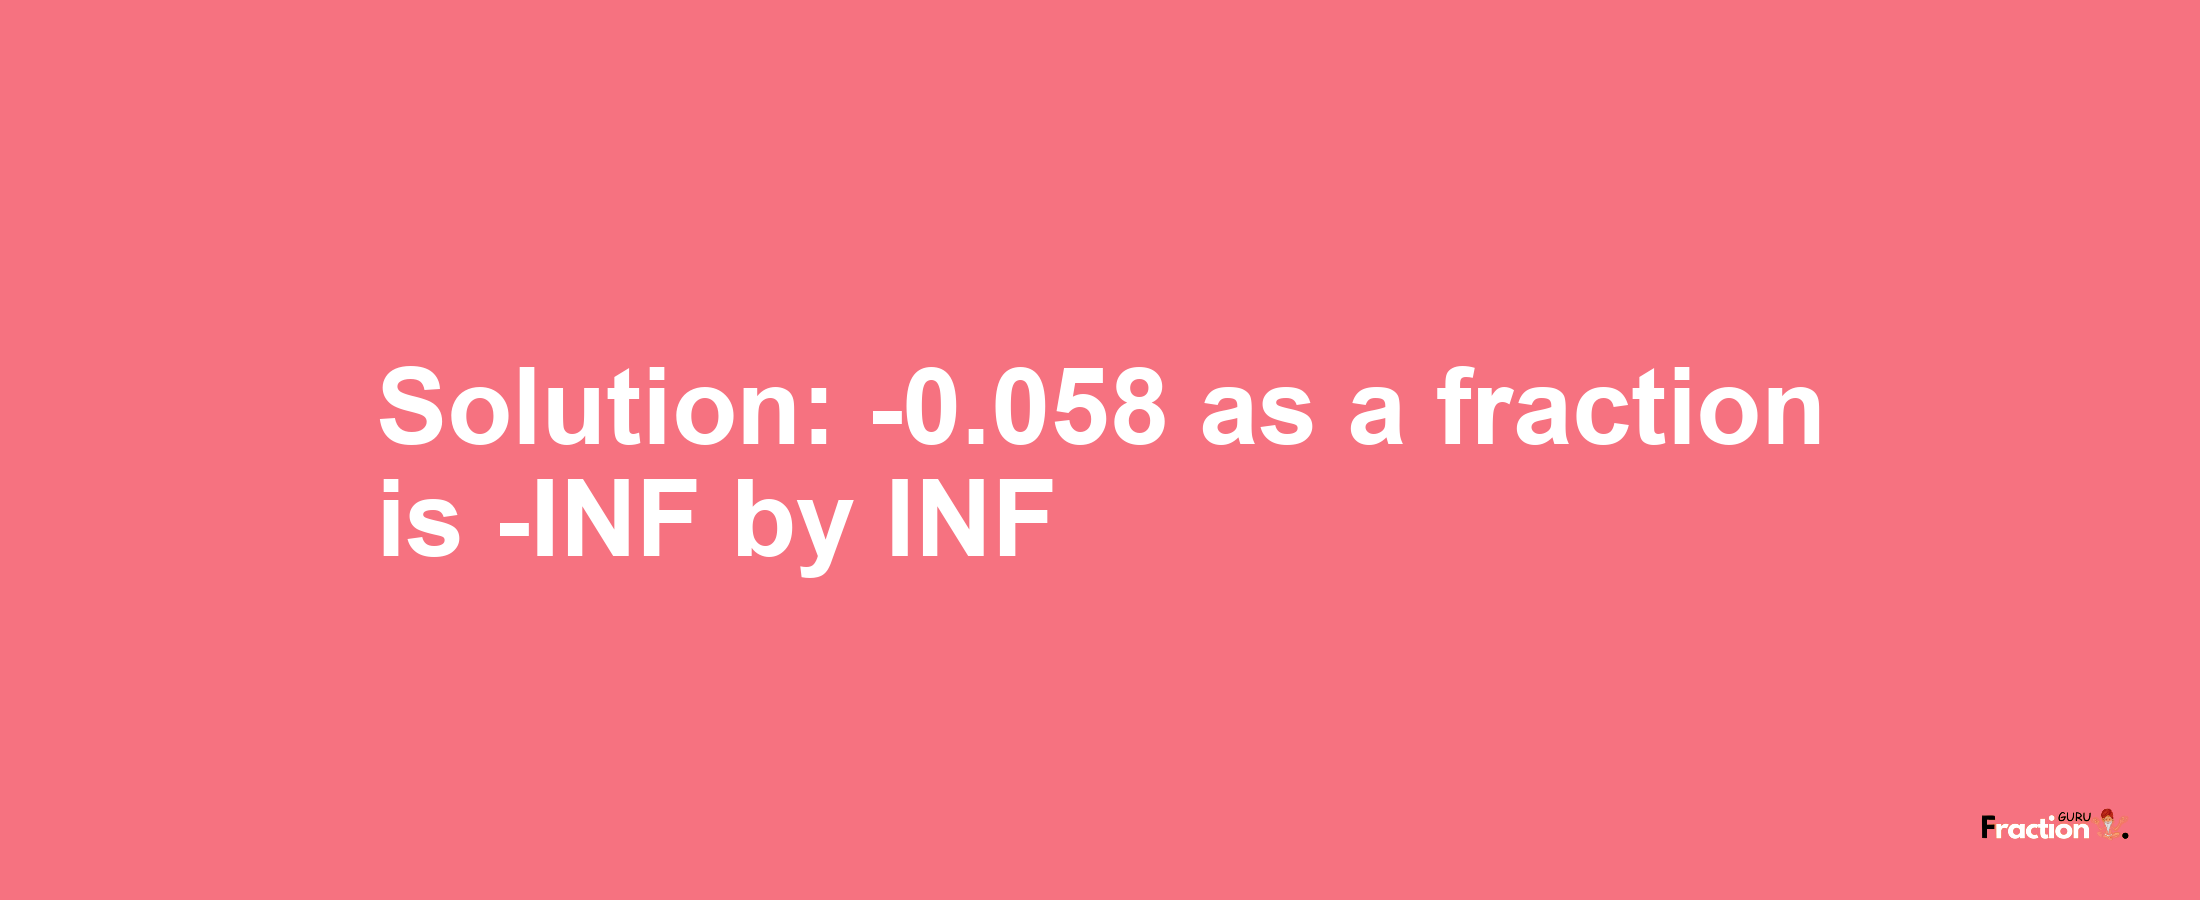 Solution:-0.058 as a fraction is -INF/INF